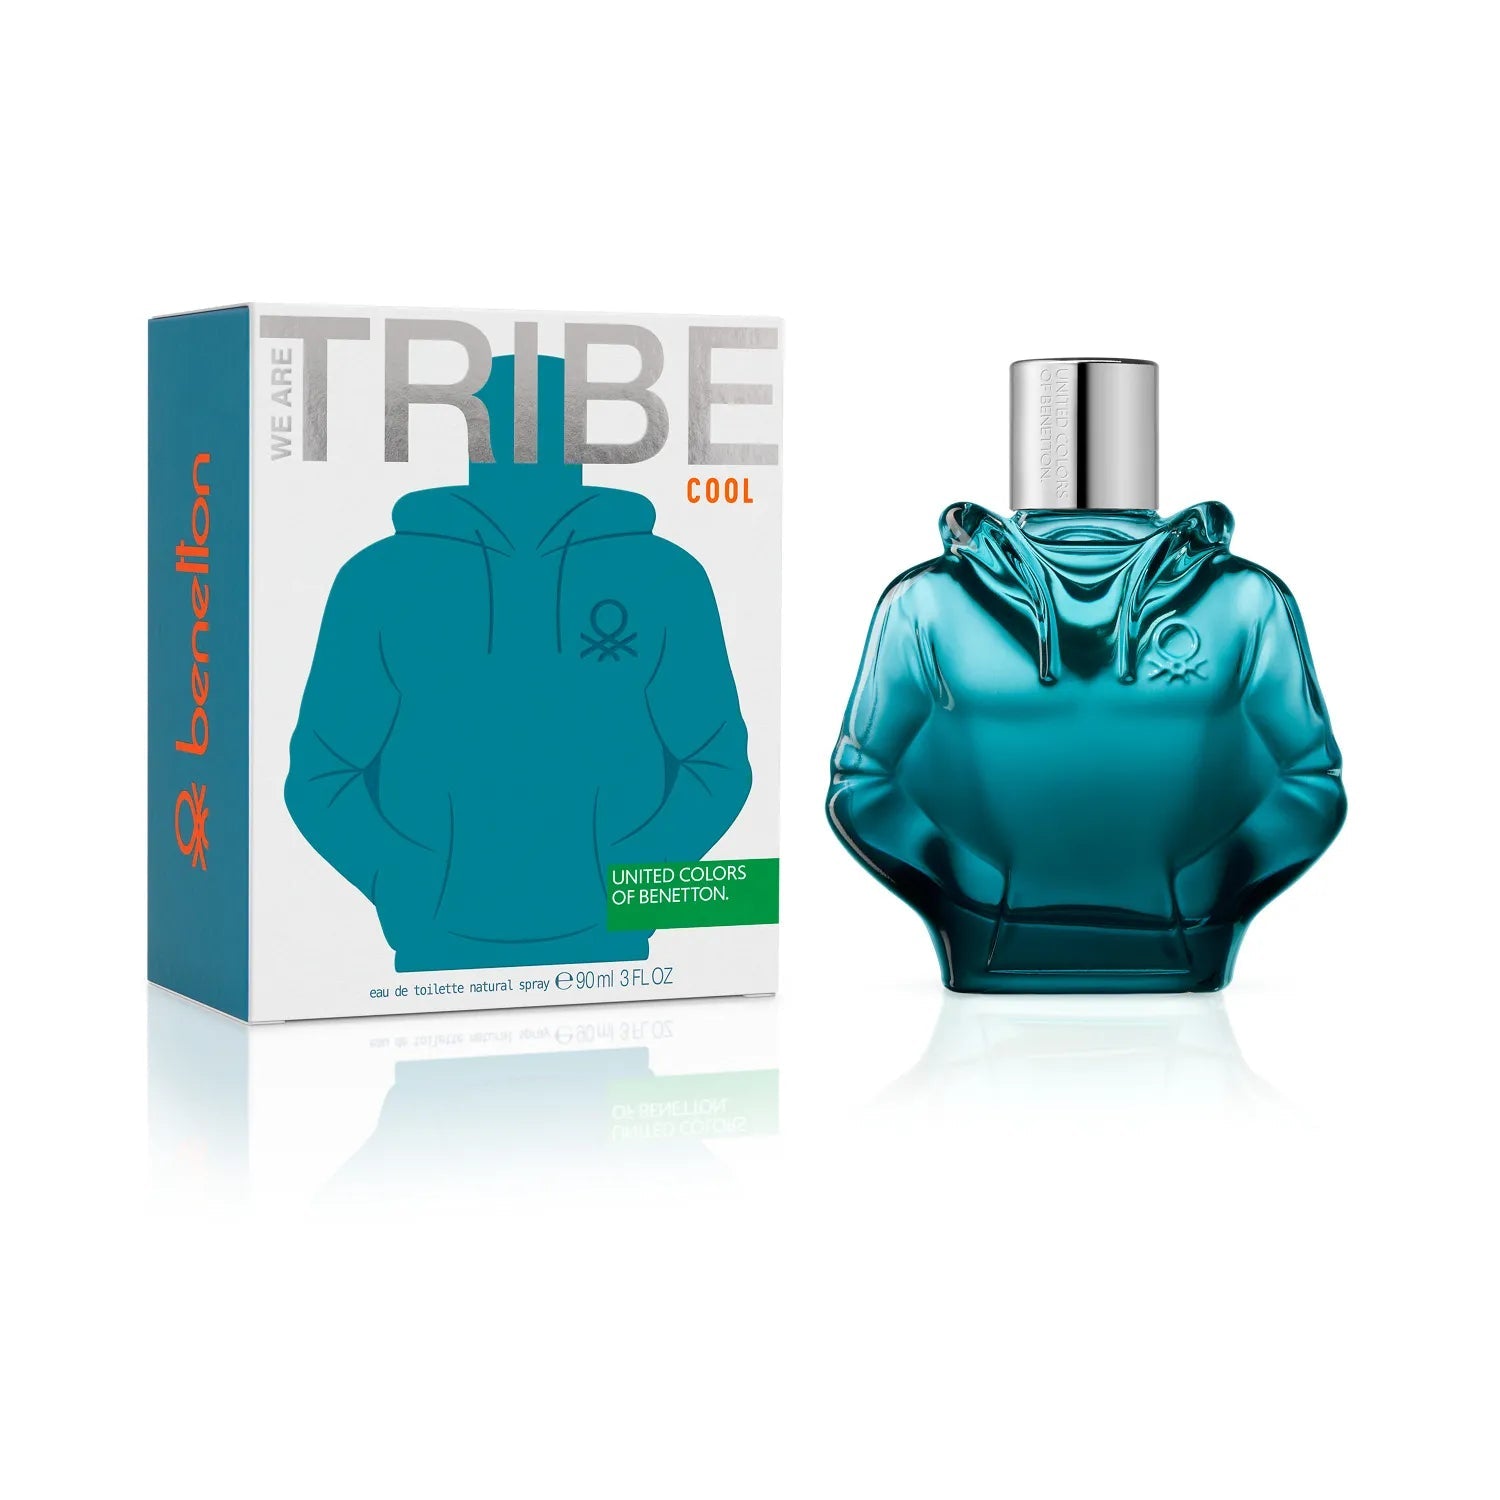 Perfume United Colors of Benetton We Are Tribe Cool EDT (M) / 90 ml - 8433982025549- 1 - Prive Perfumes Honduras